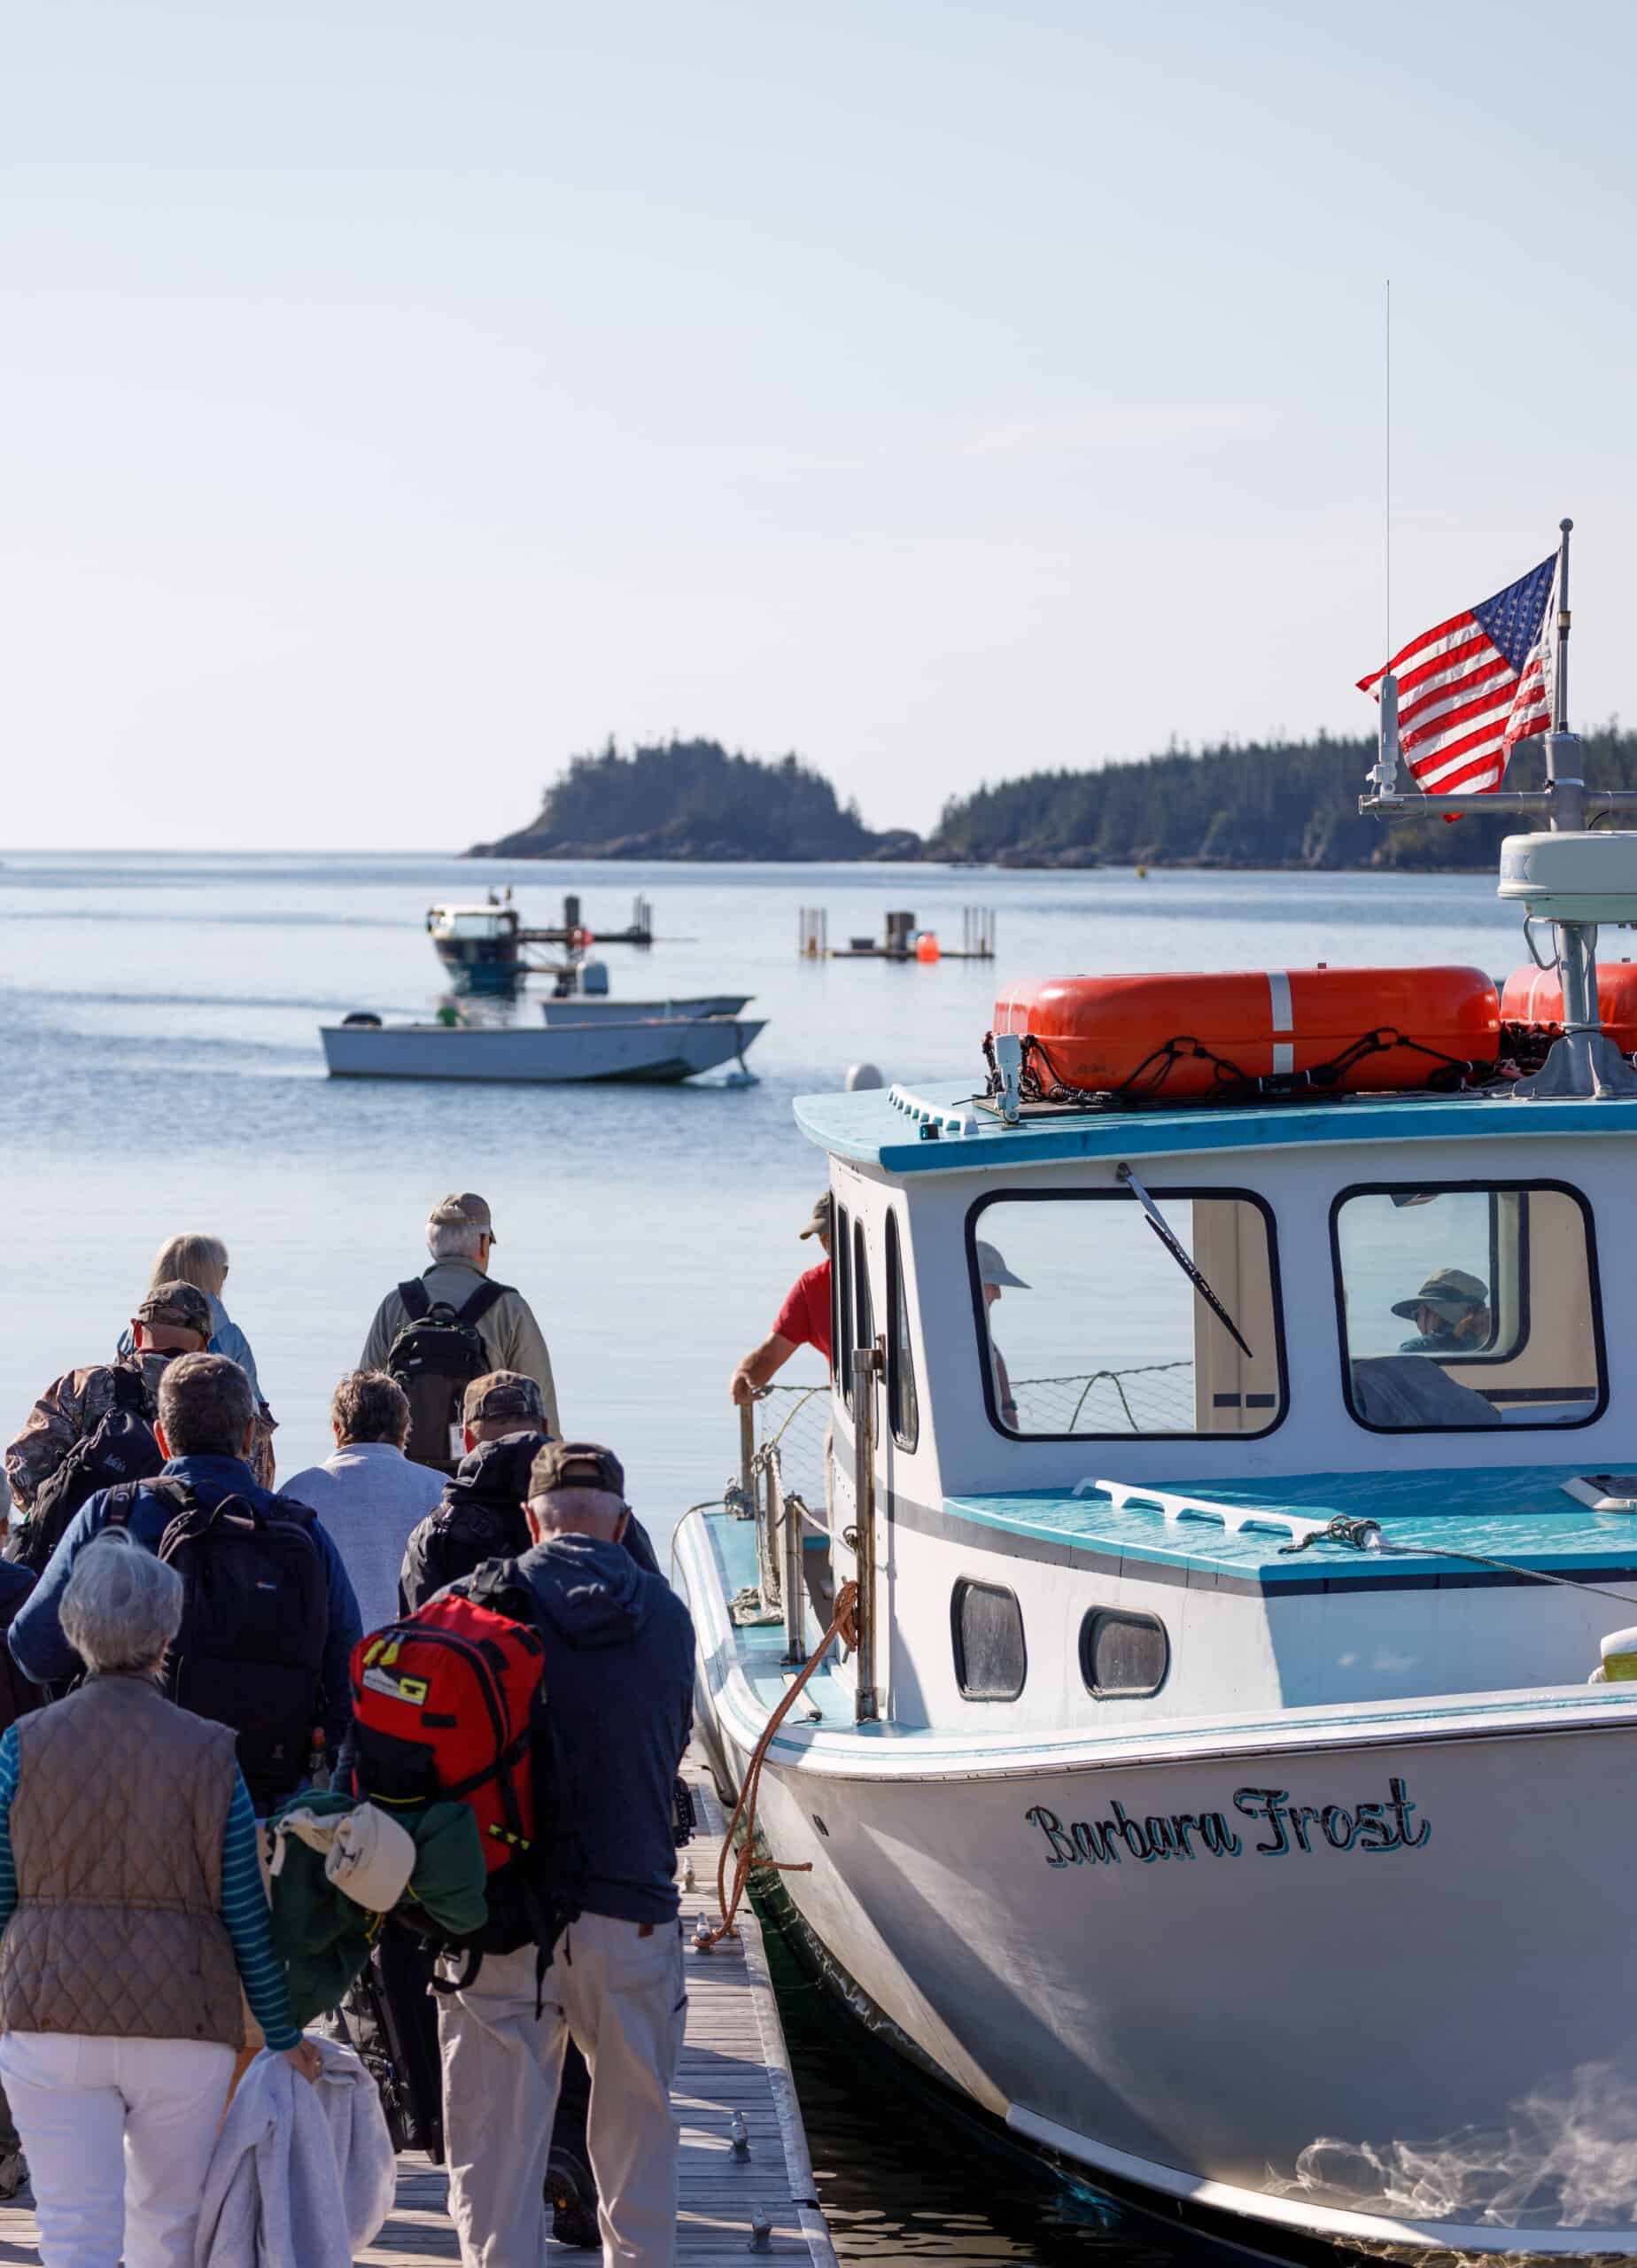 People standing in line to board a boat for a puffin tour in Maine; other boats are out in the ocean beyond under a pale blue sky